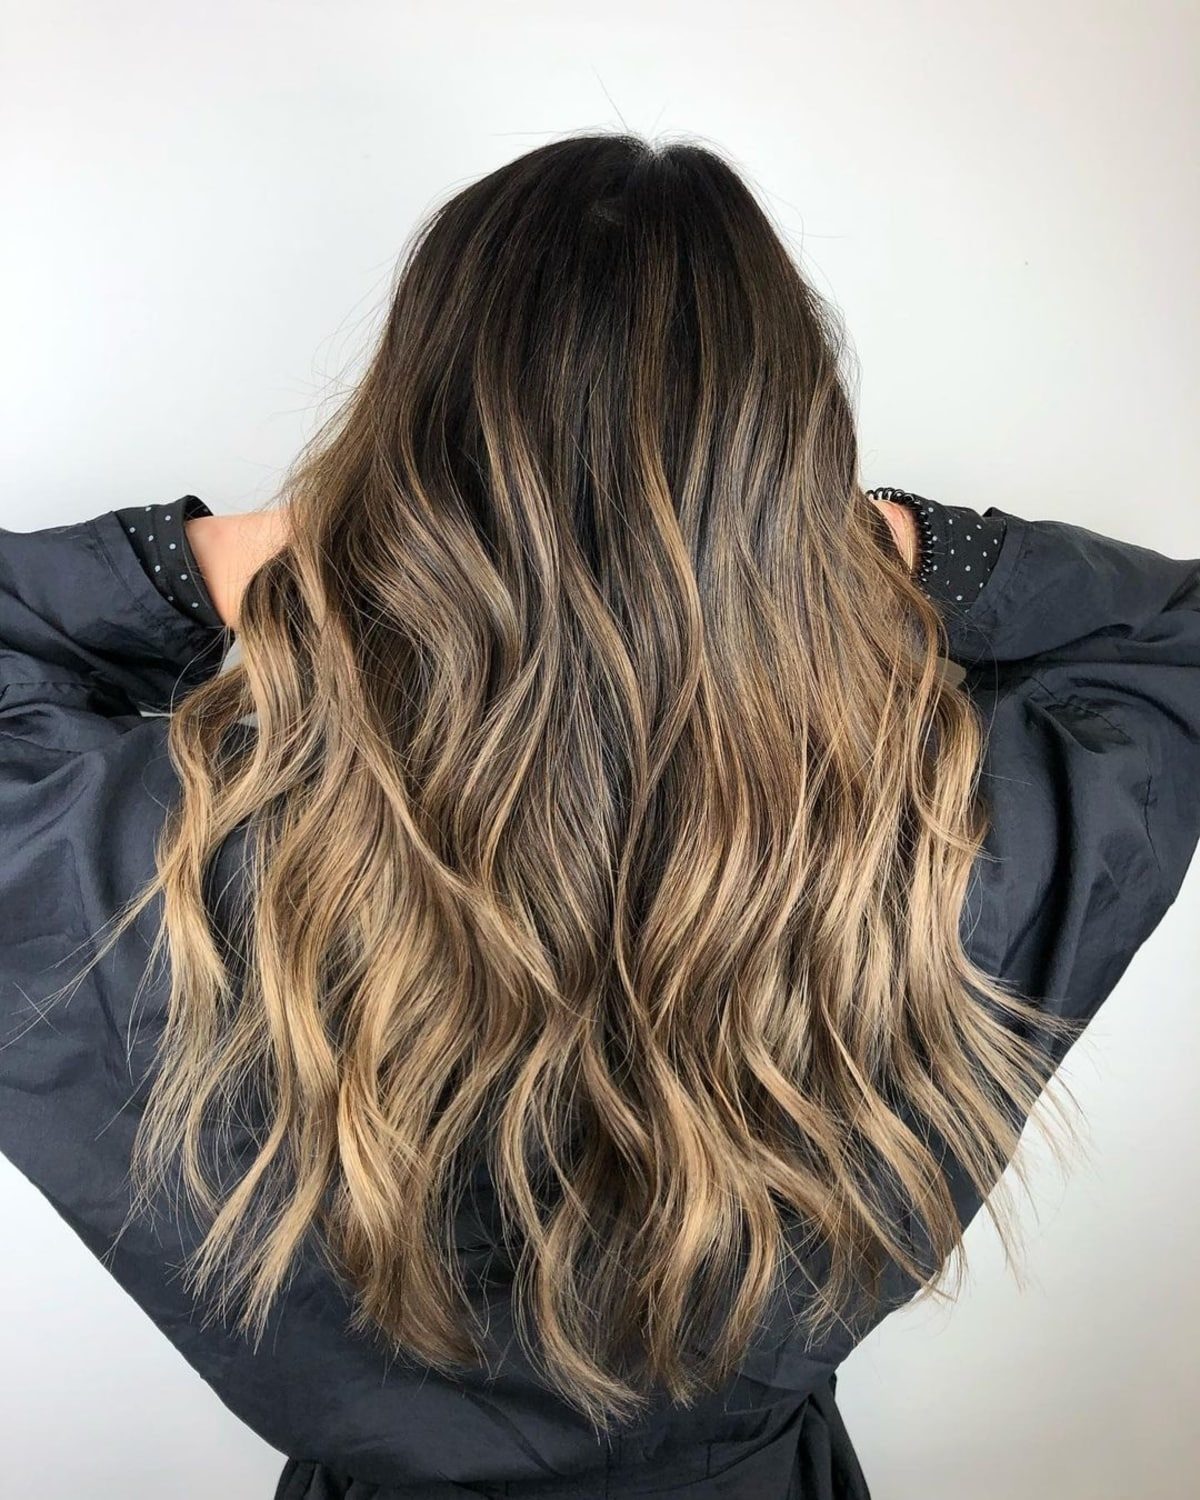 26 Amazing Examples of Dark Hair with Highlights for Incredible Contrast